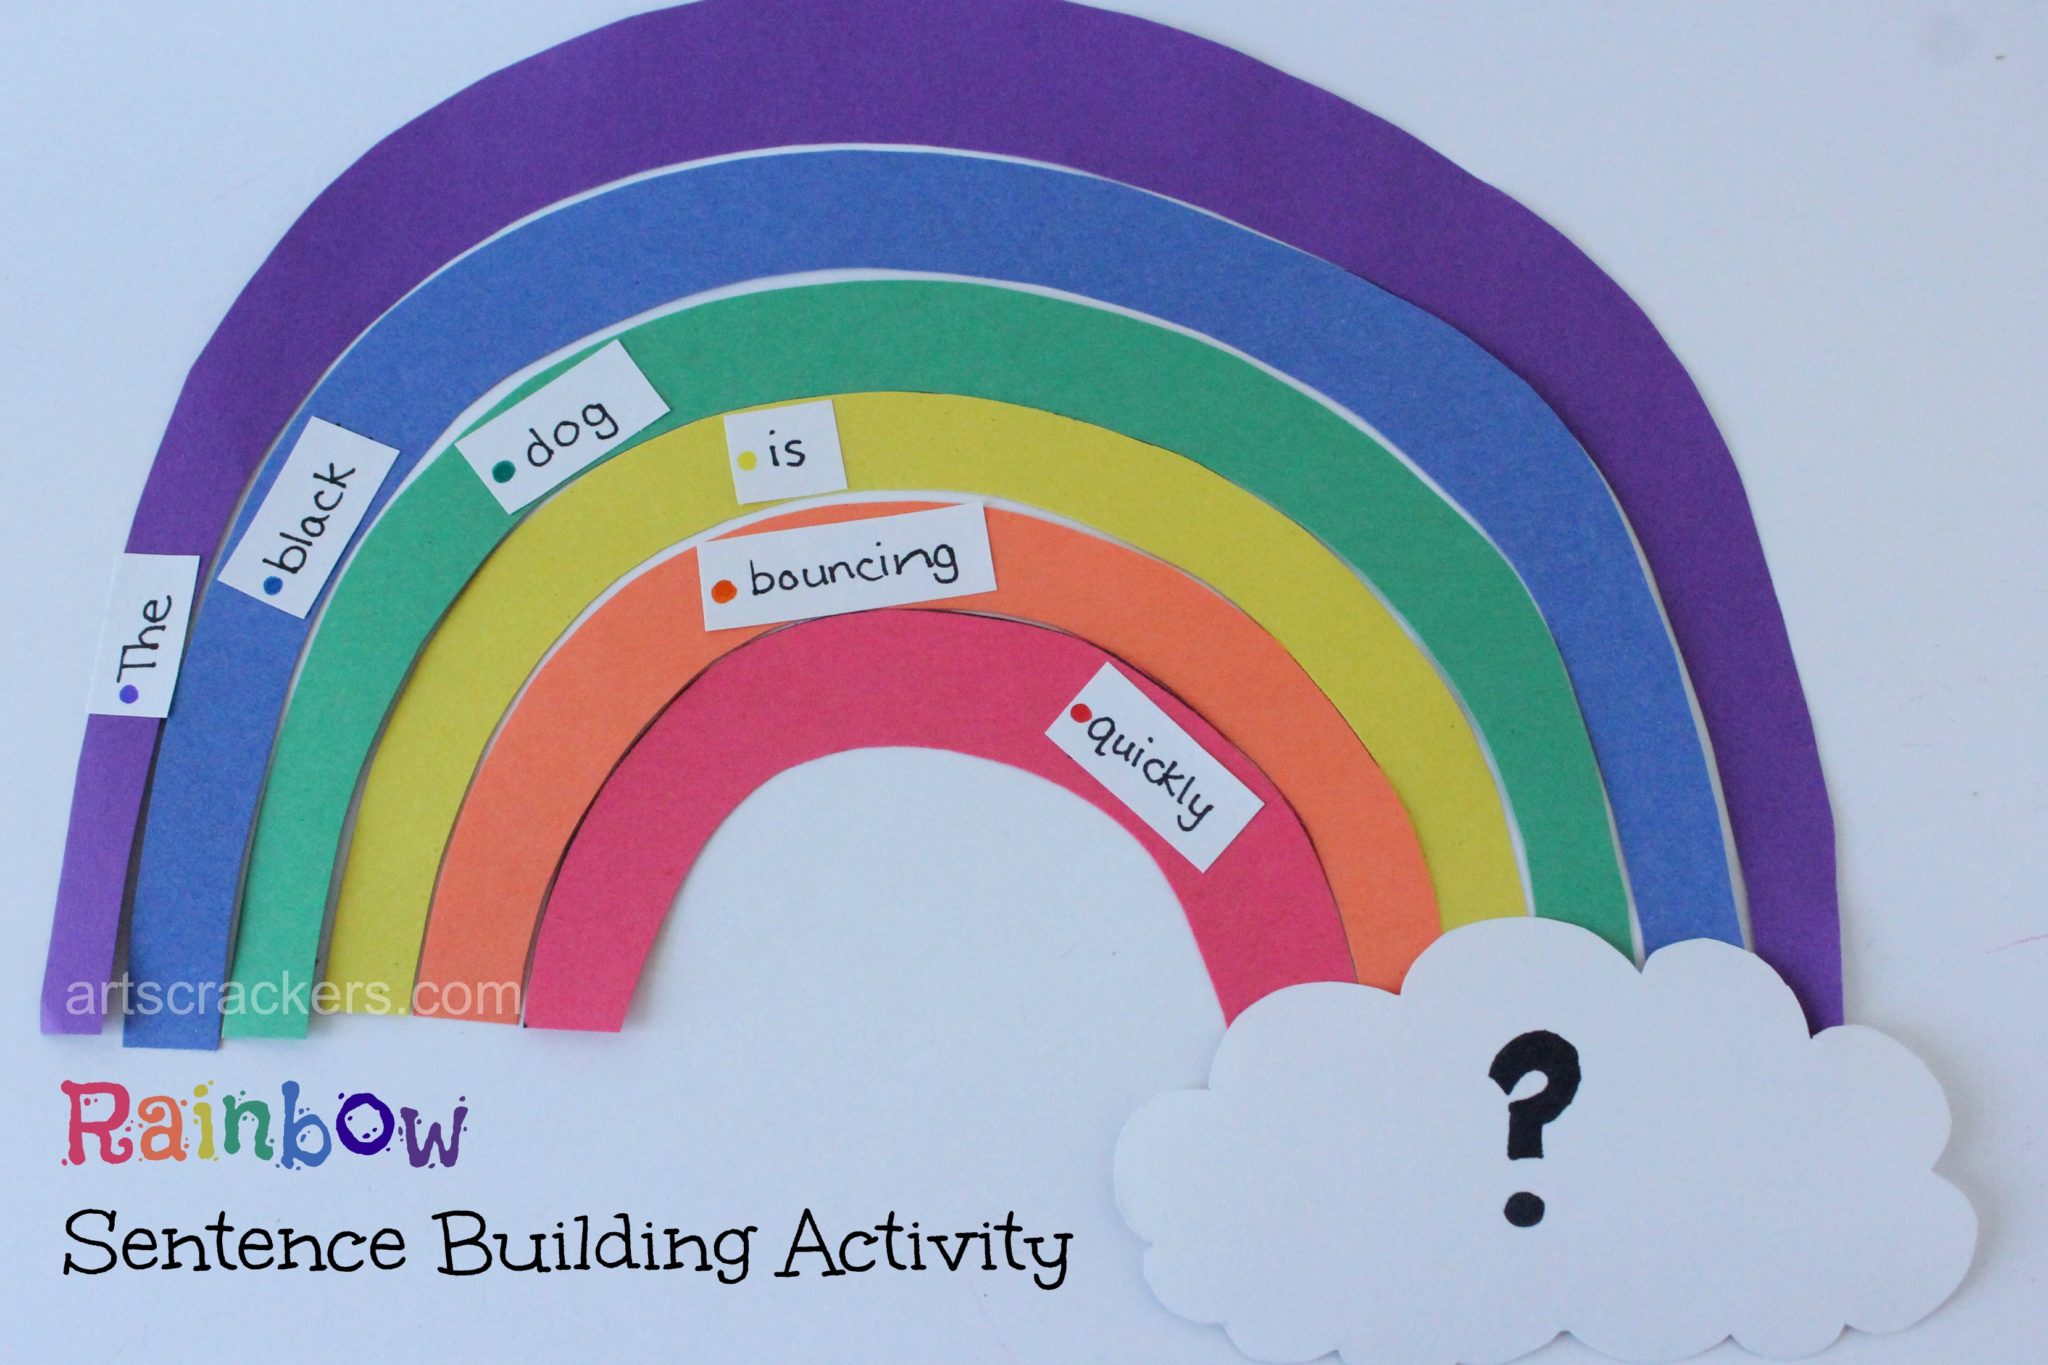 Rainbow Sentence Building Activity. Click the picture to view the tutorial.